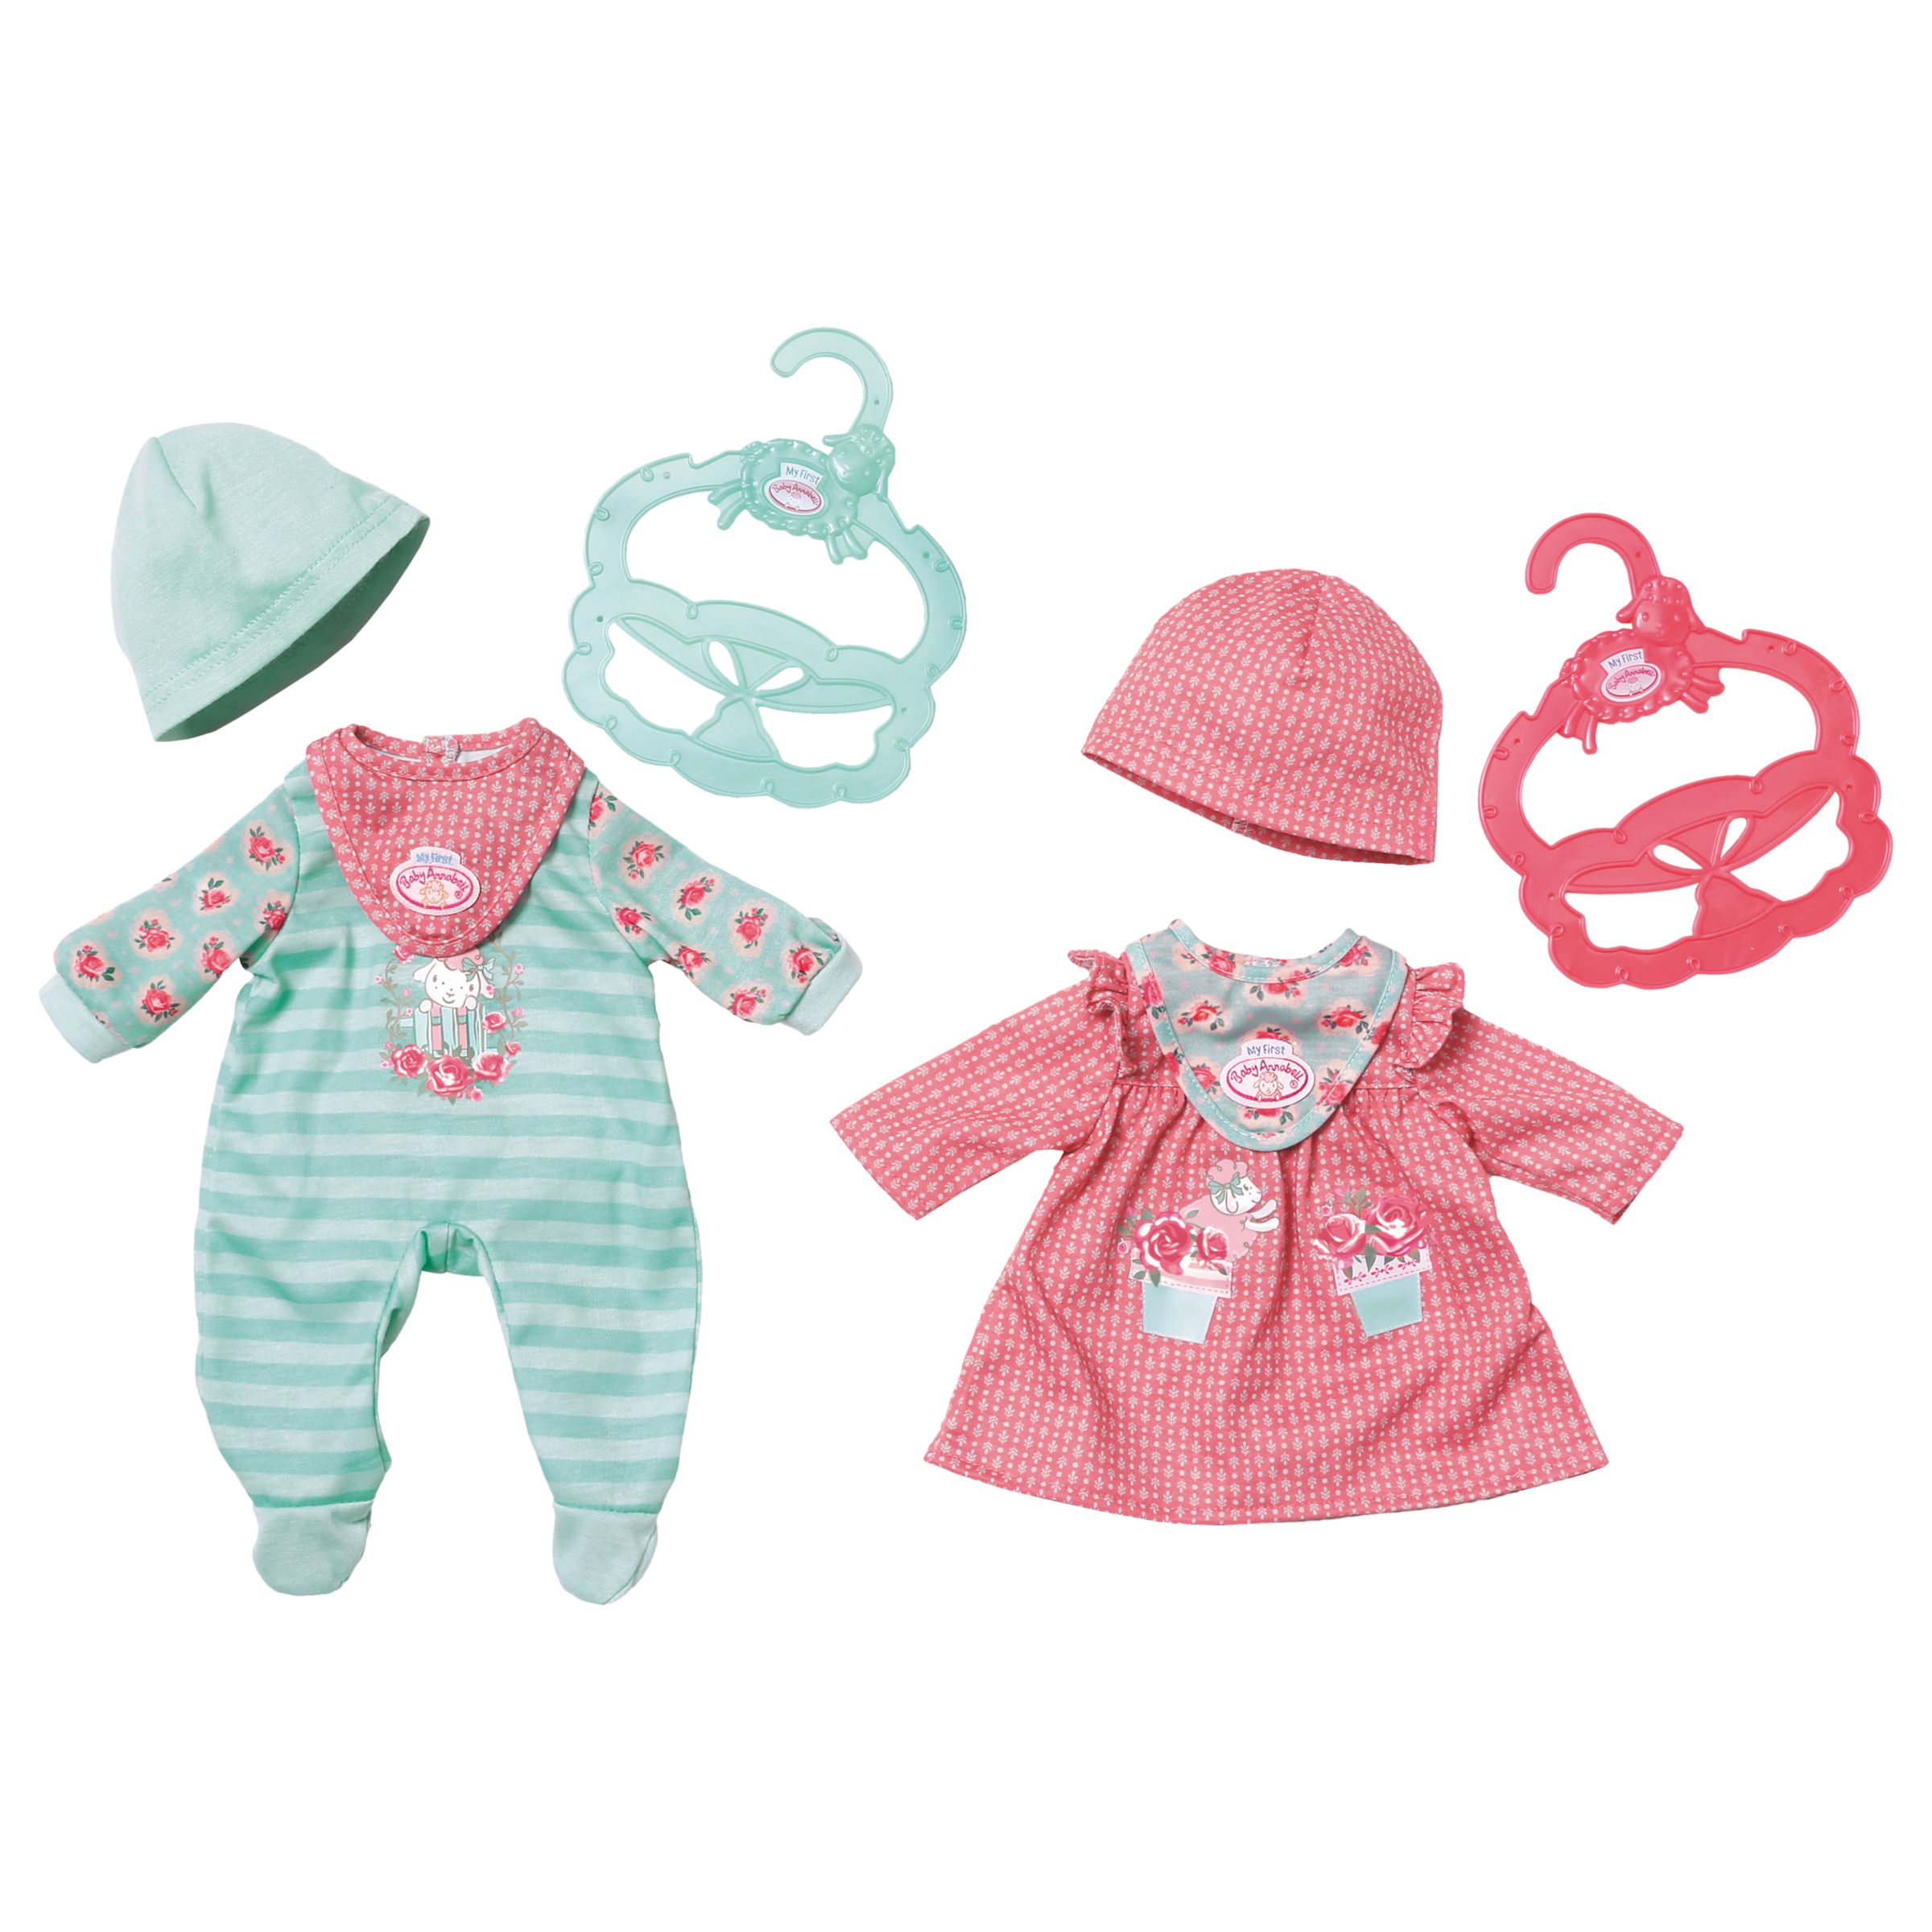 clothes for baby annabell doll